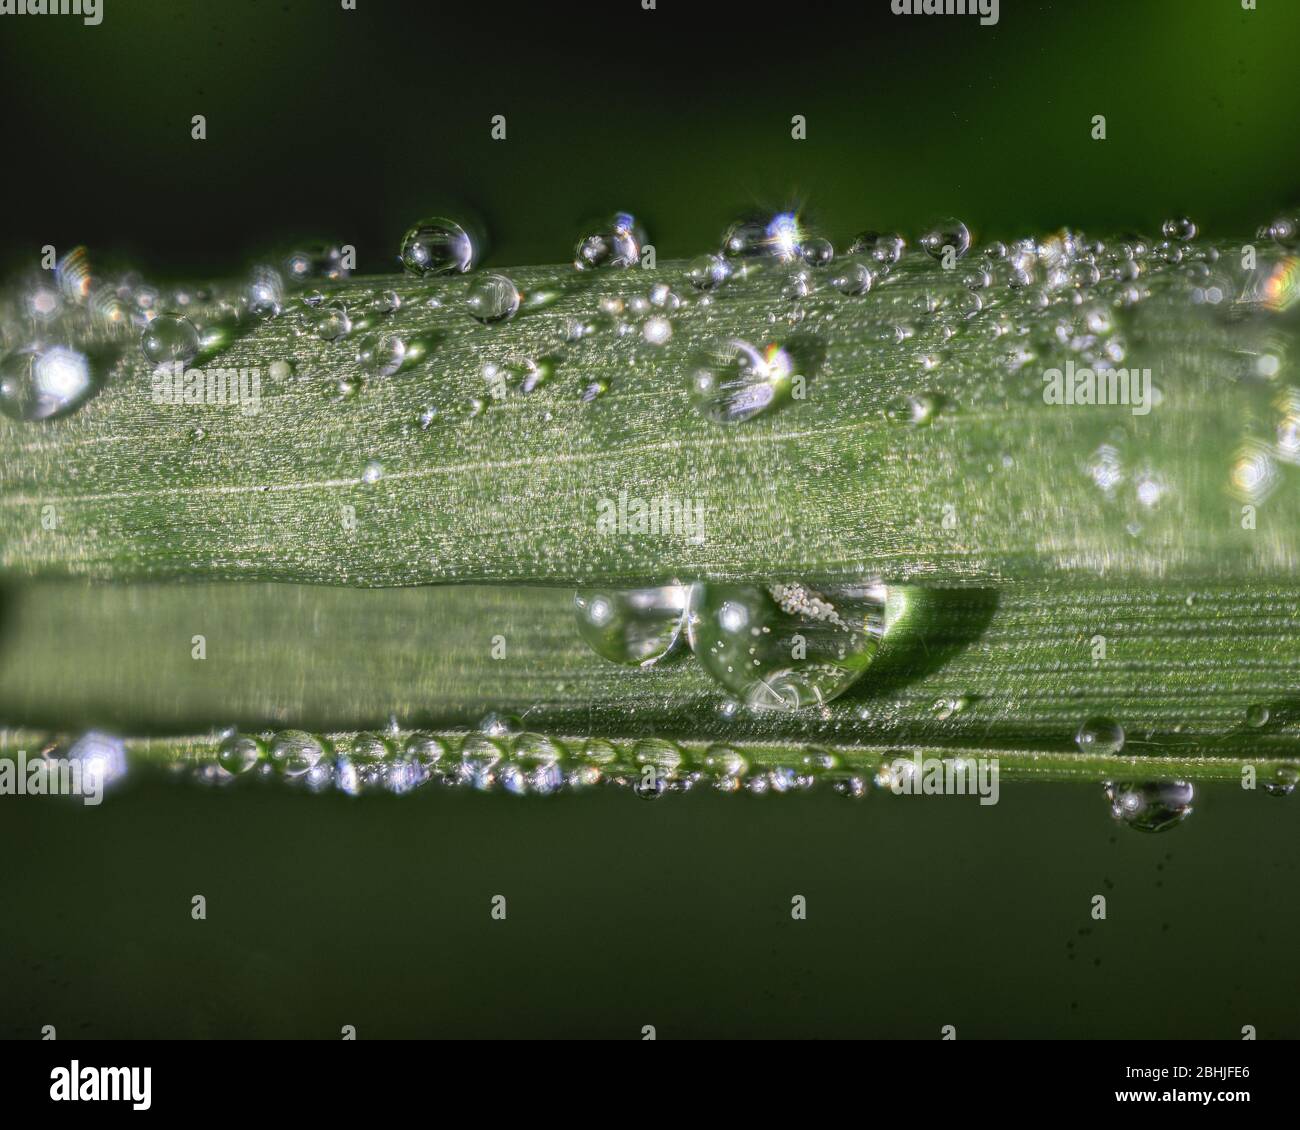 Two drops of Water inside a rolled Leaf of Grass covered with Dew Droplets Stock Photo